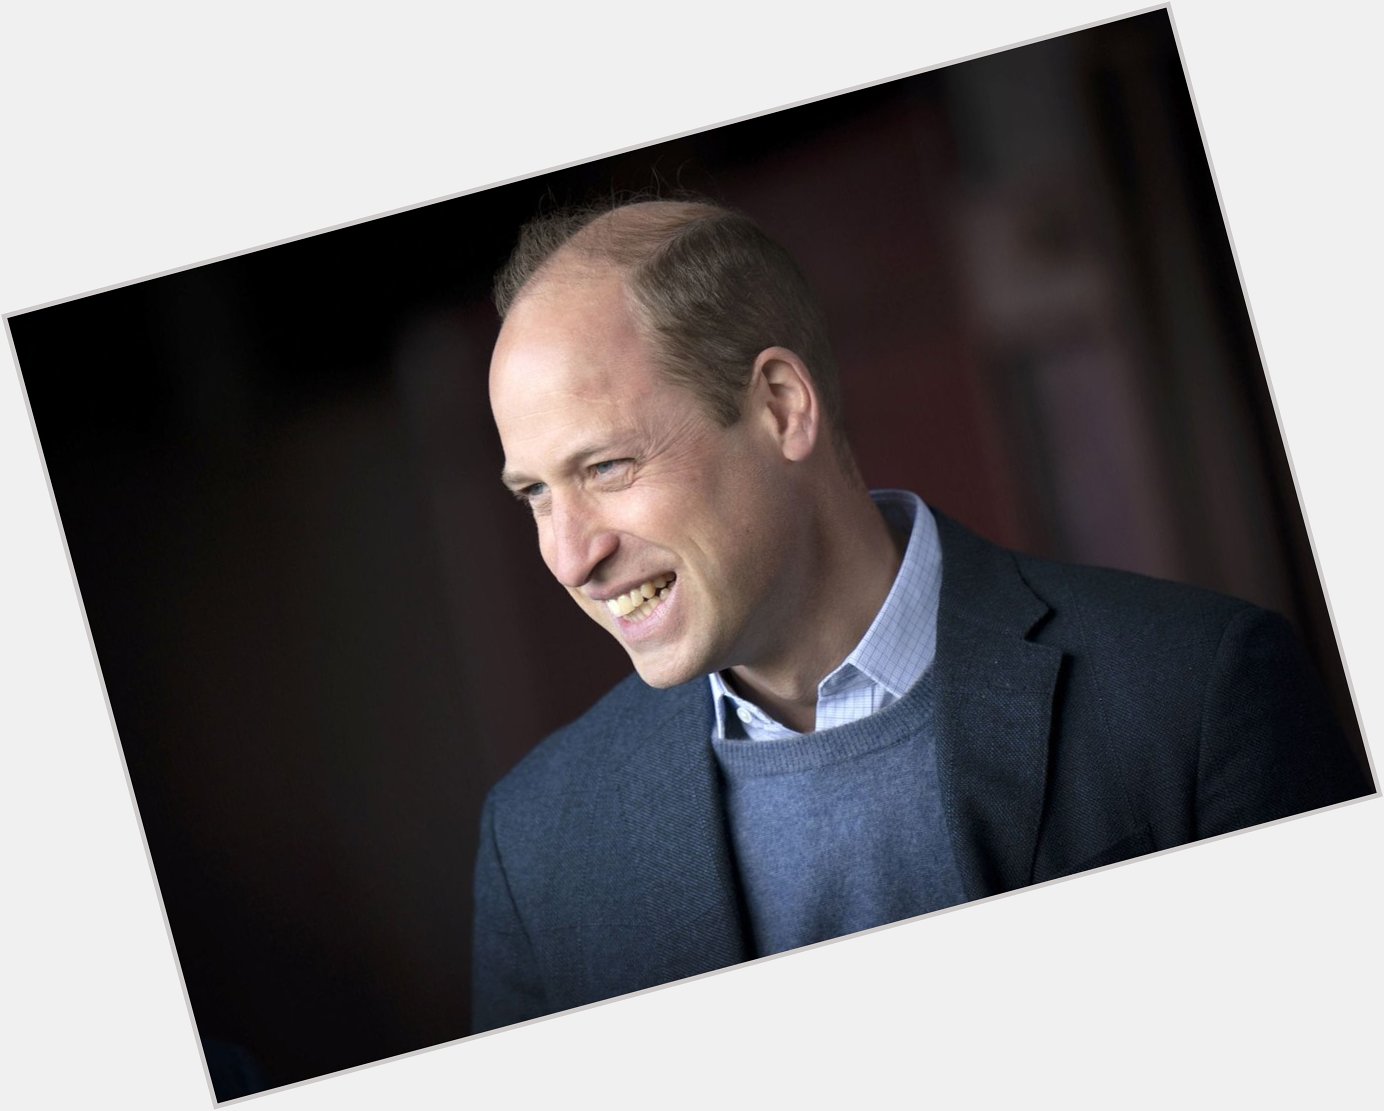 HAPPY BIRTHDAY to Prince William!  The Duke of Cambridge turns 40 today.

MORE:  